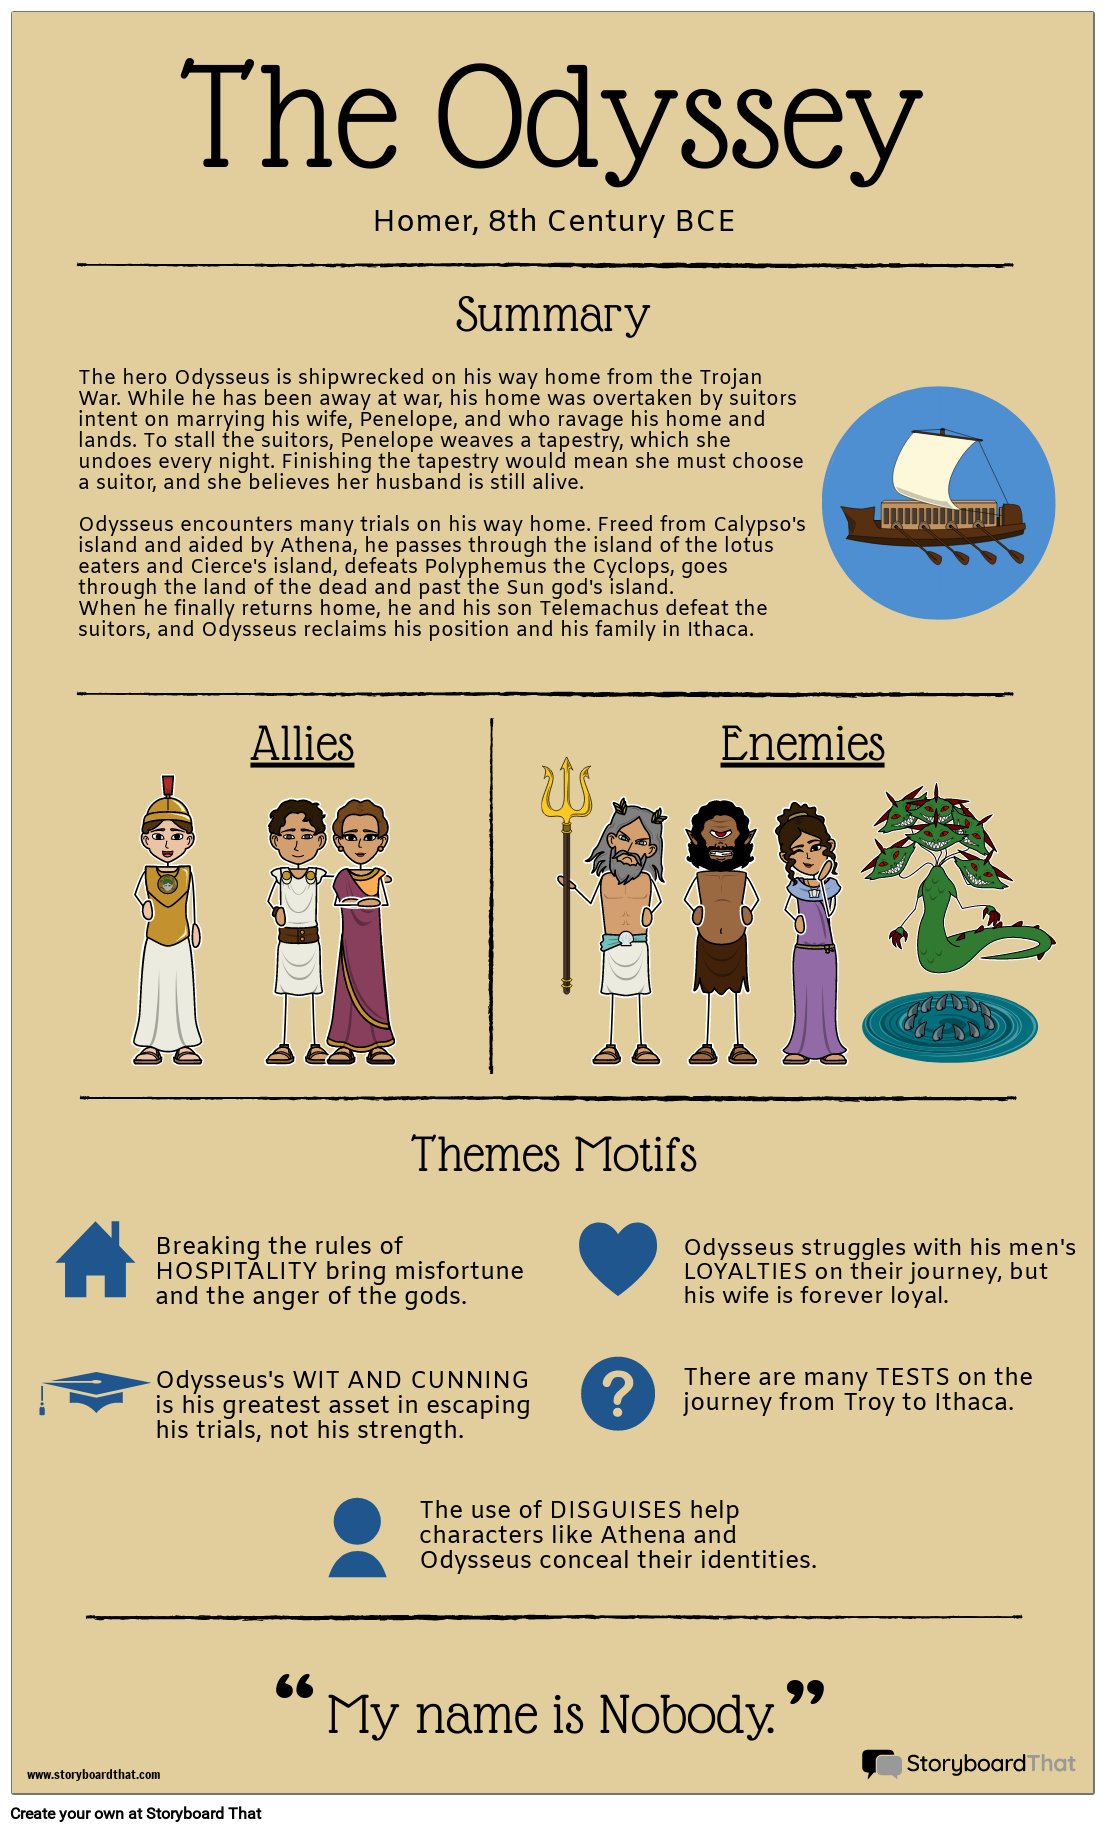 The Odyssey Infographic